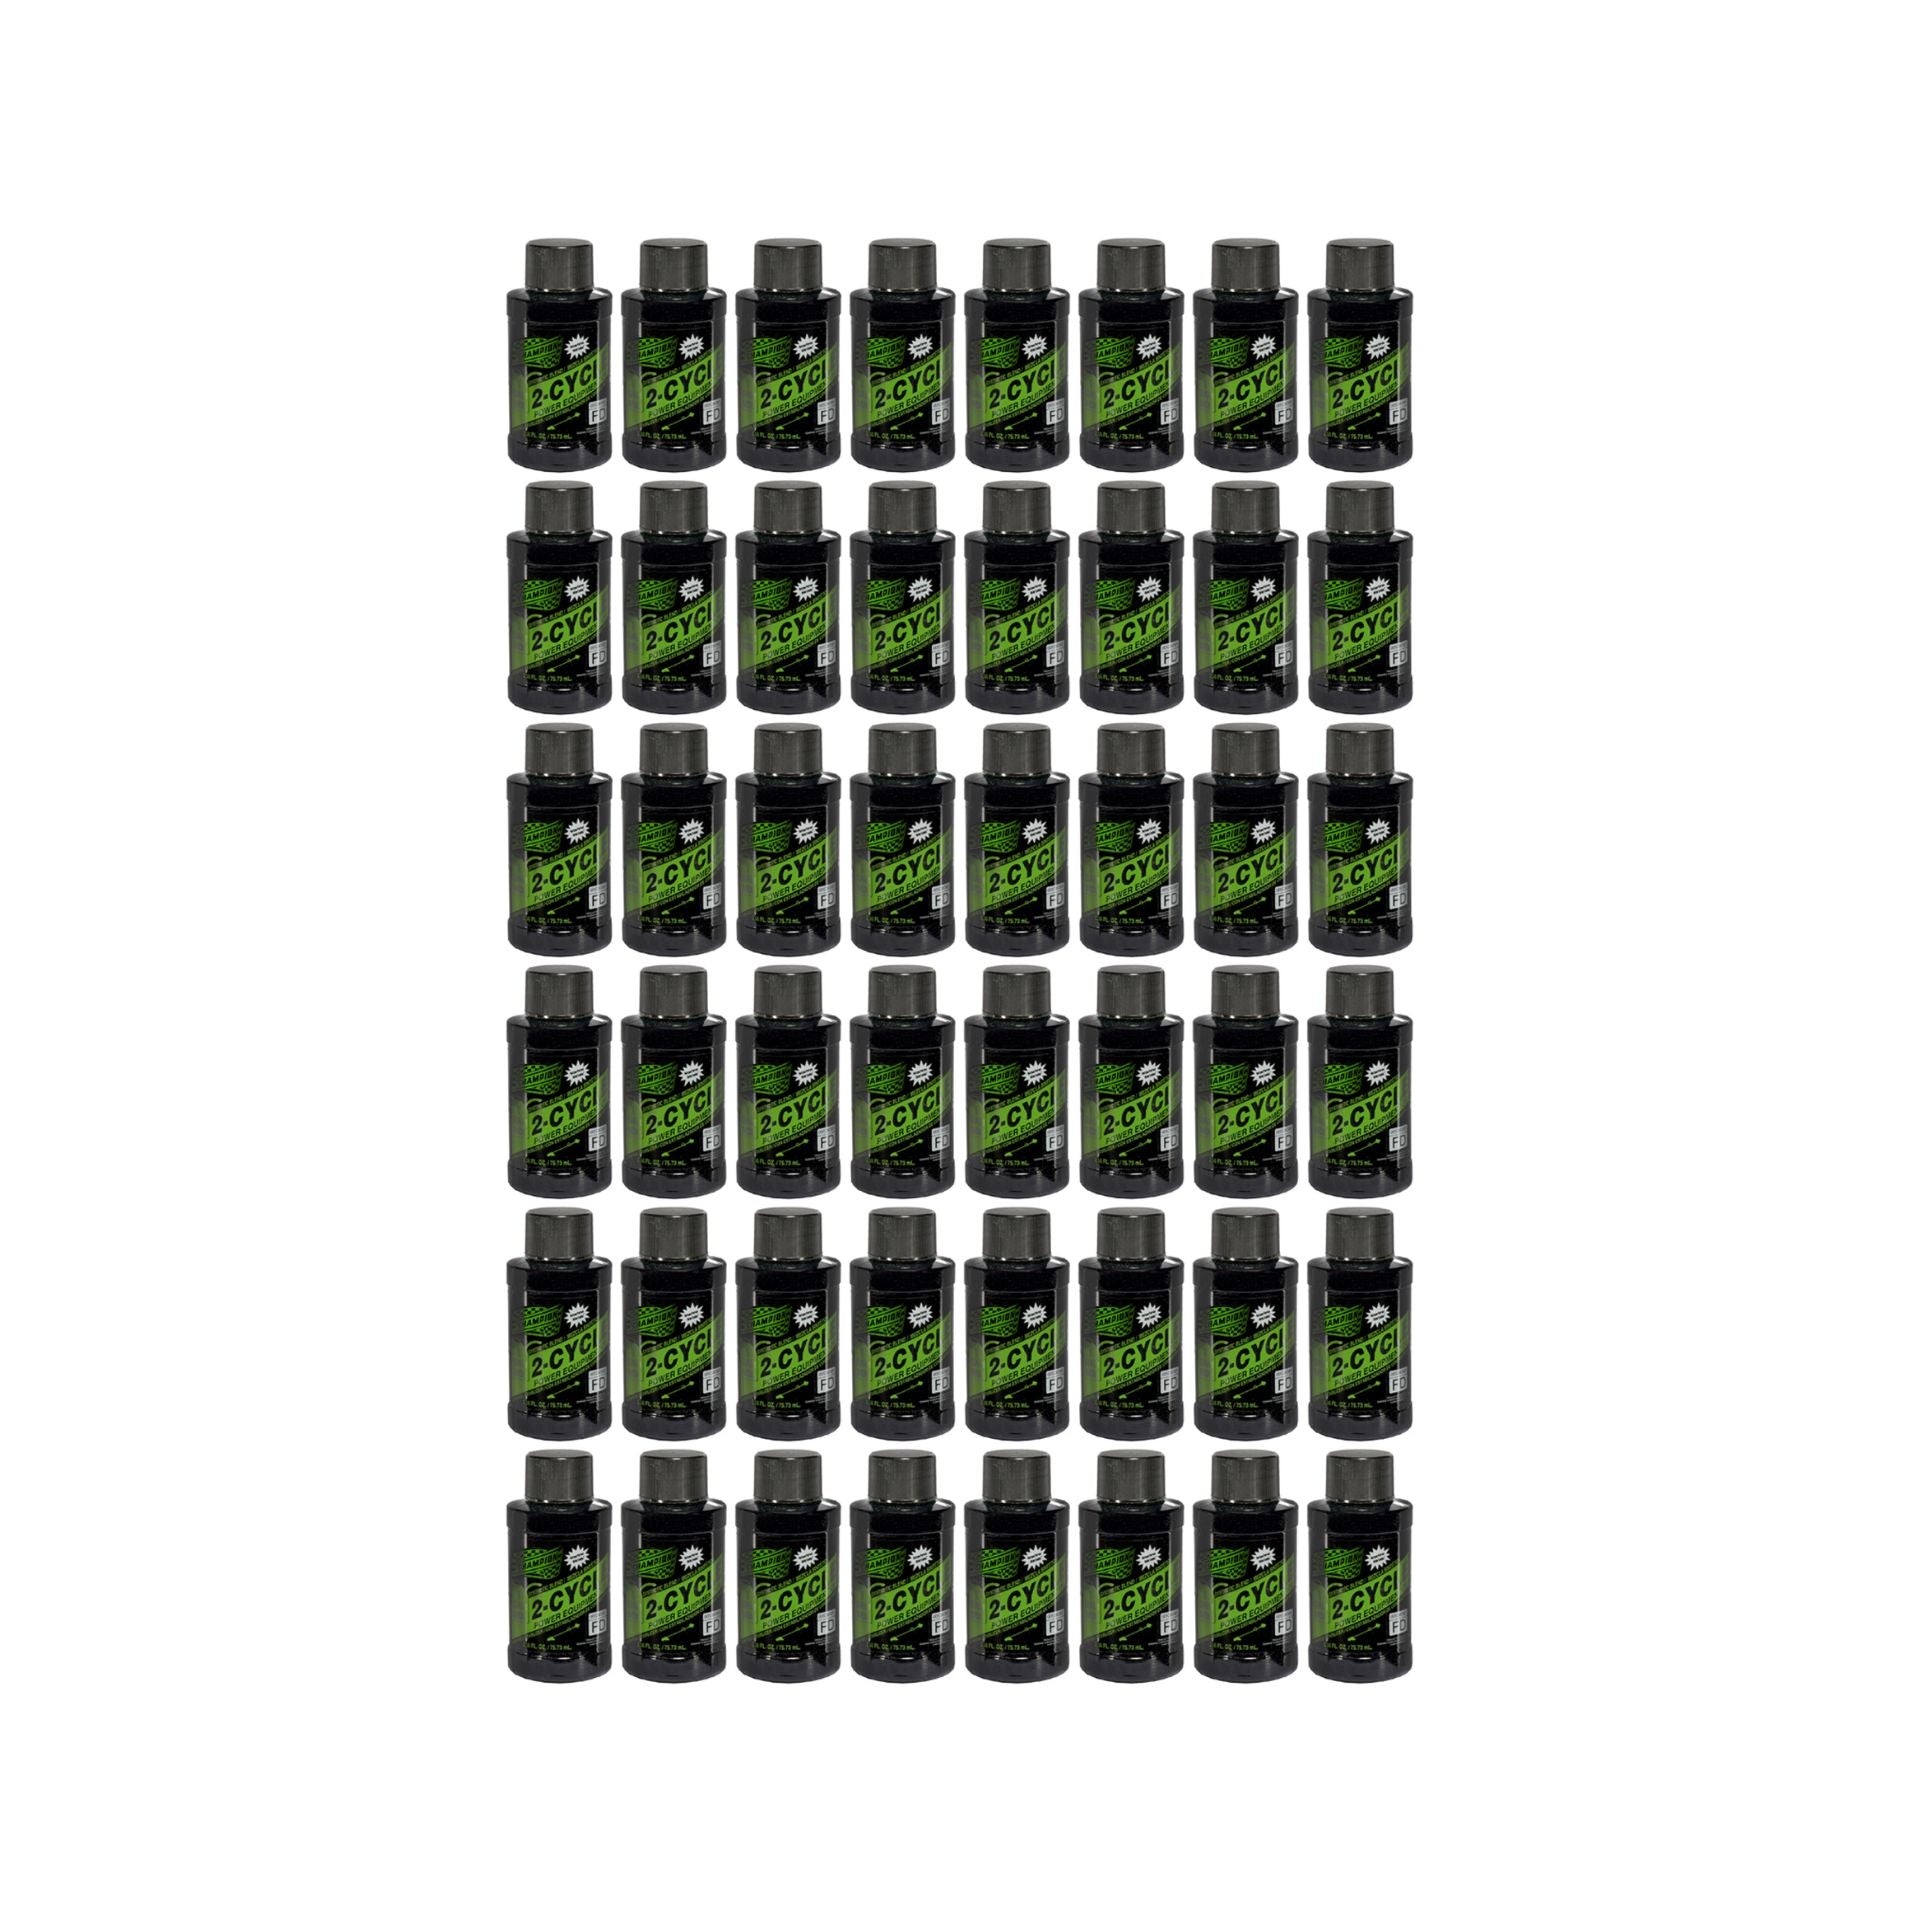 2-Cycle Oil Synthetic-Blend (Case of 48 2.56oz bottles)